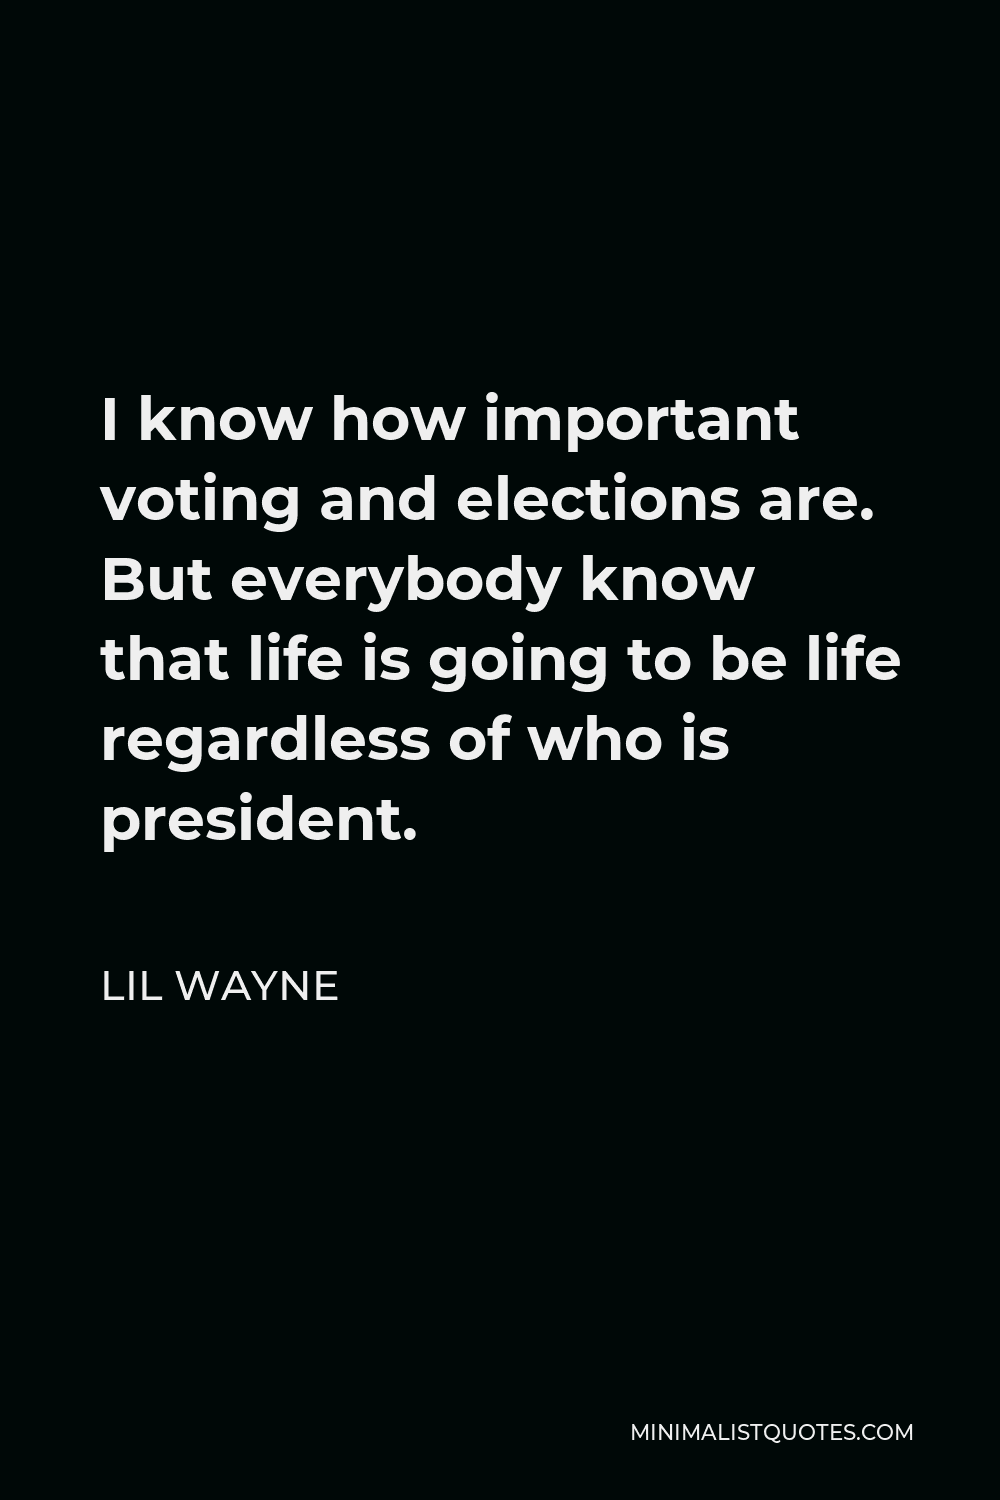 Lil Wayne Quote - I know how important voting and elections are. But everybody know that life is going to be life regardless of who is president.